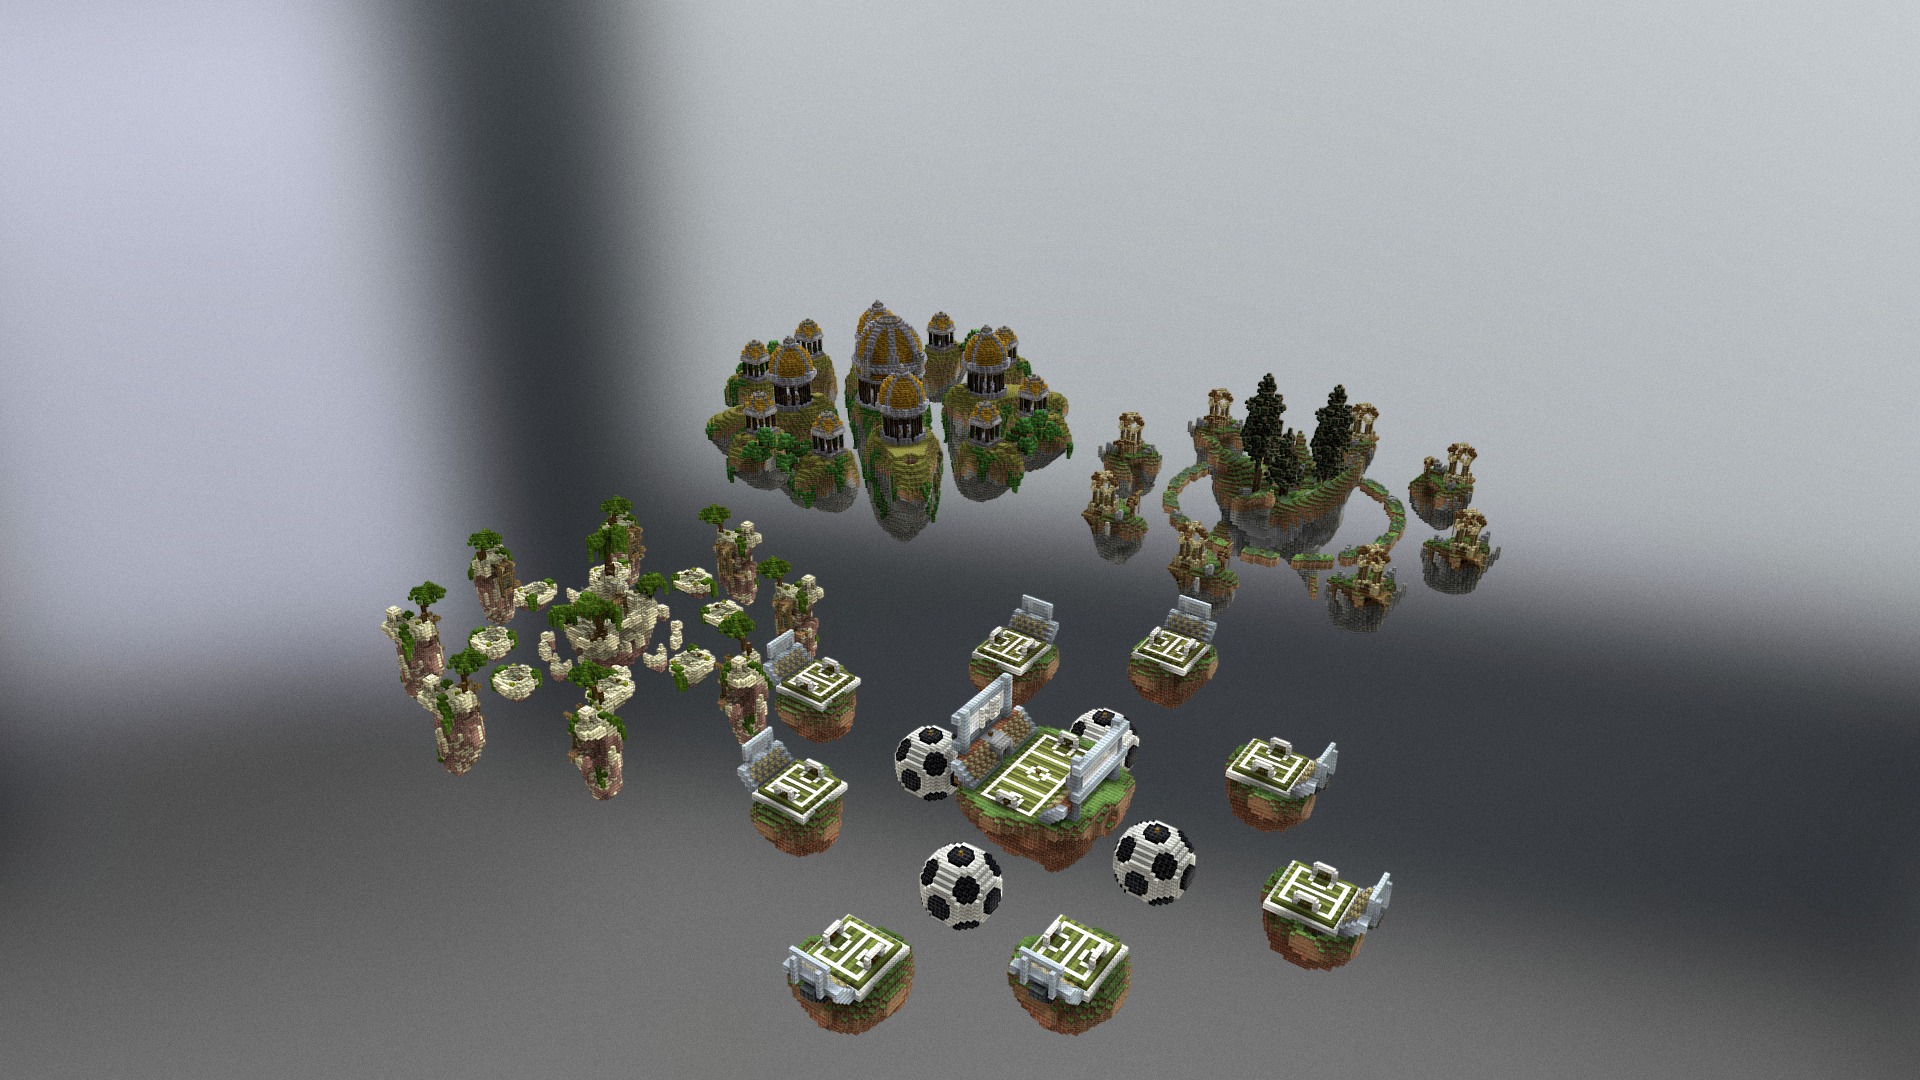 3D model SkyWars GameBundle №2 - This is a 3D model of the SkyWars GameBundle №2. The 3D model is about a group of small toy trees.